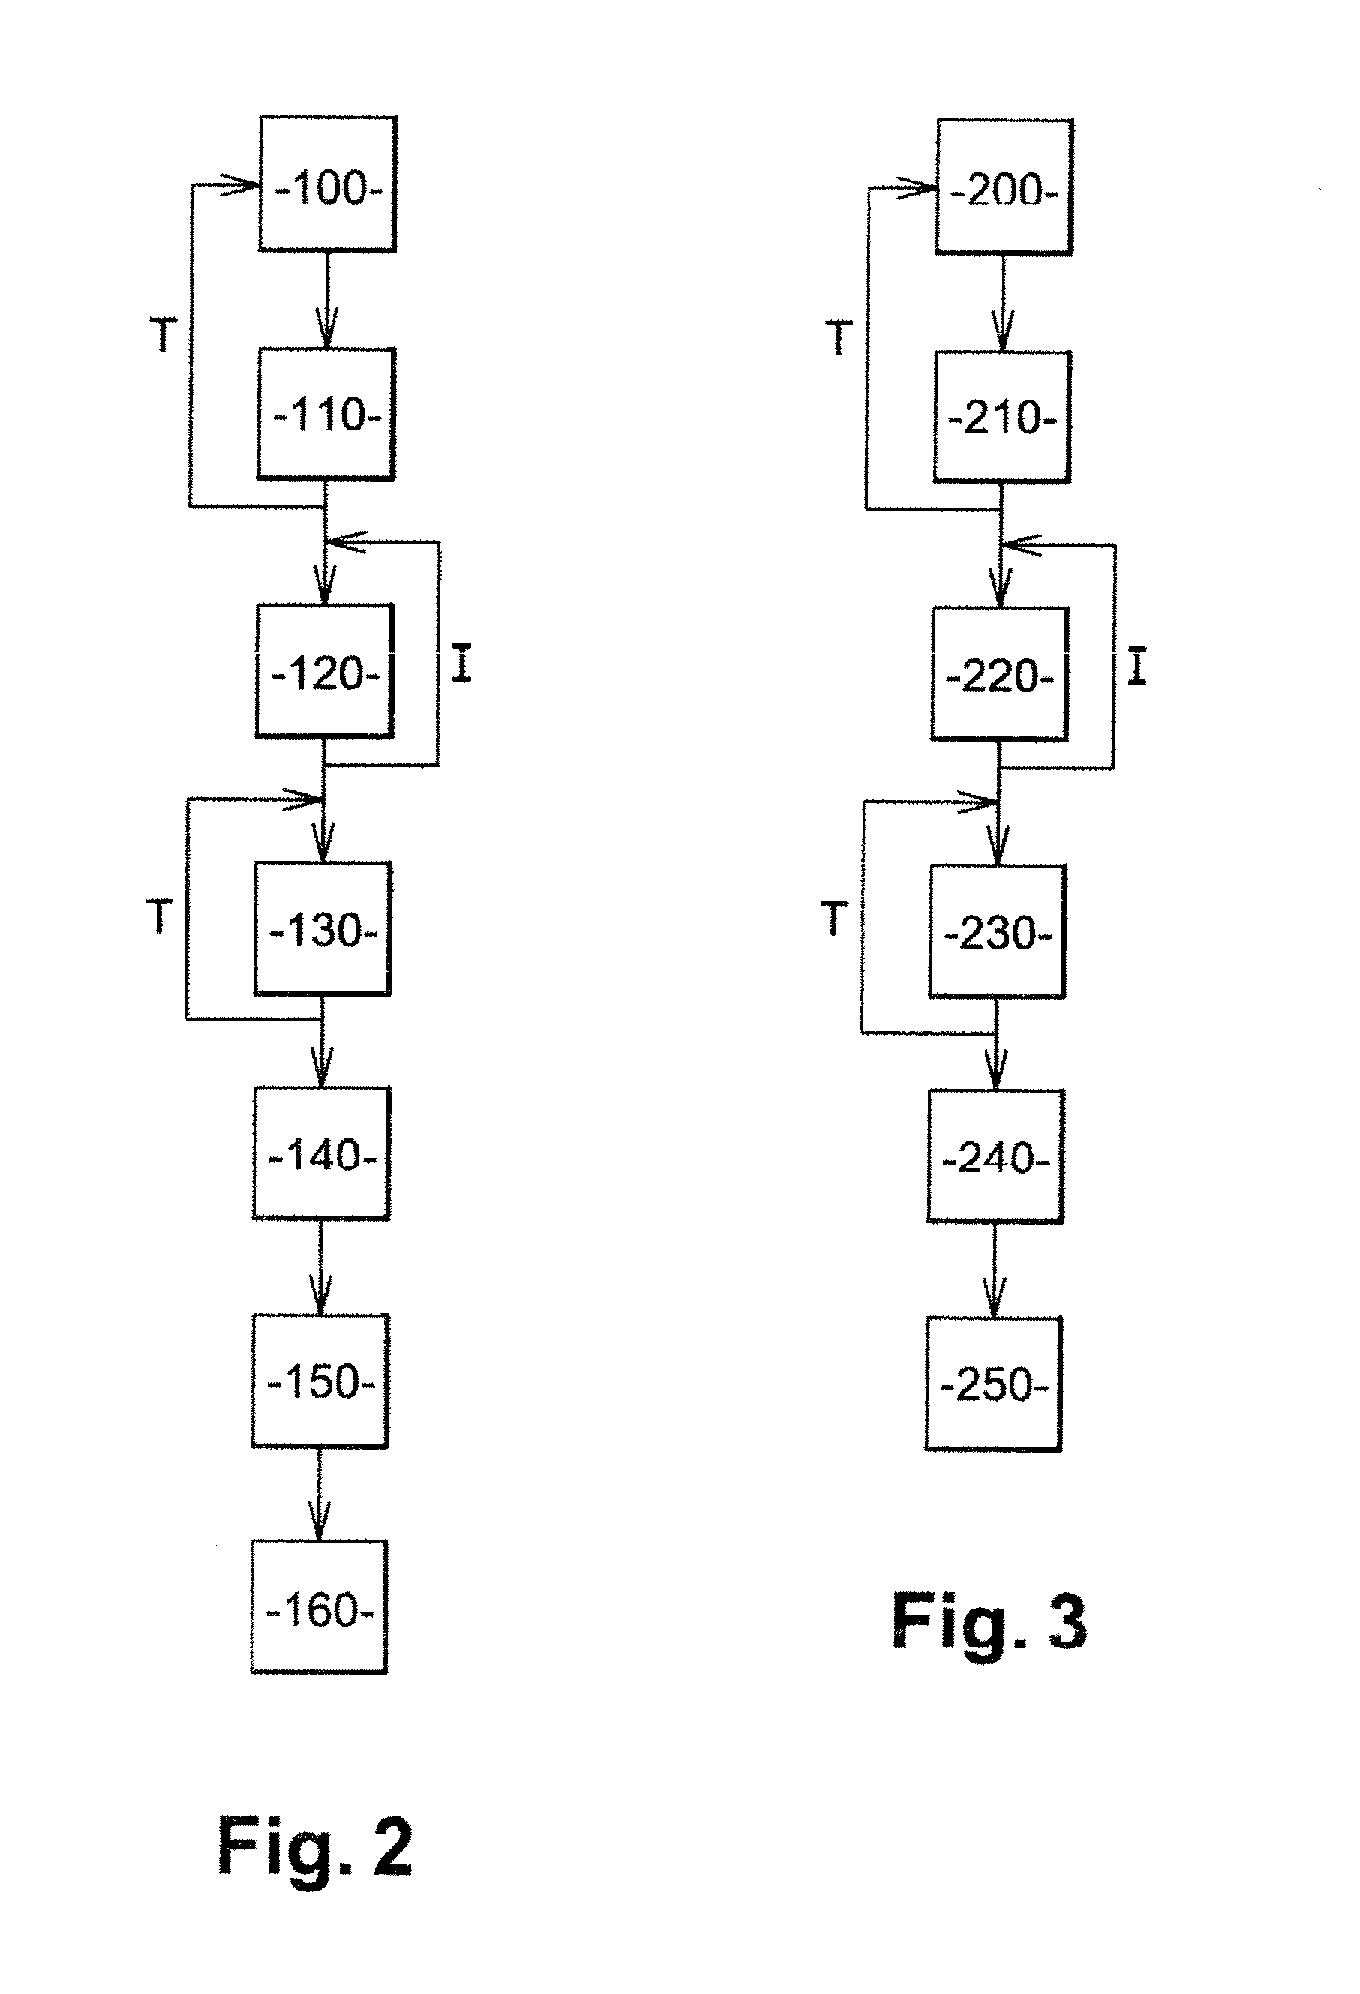 Method of routing data in a network comprising nodes organized into clusters